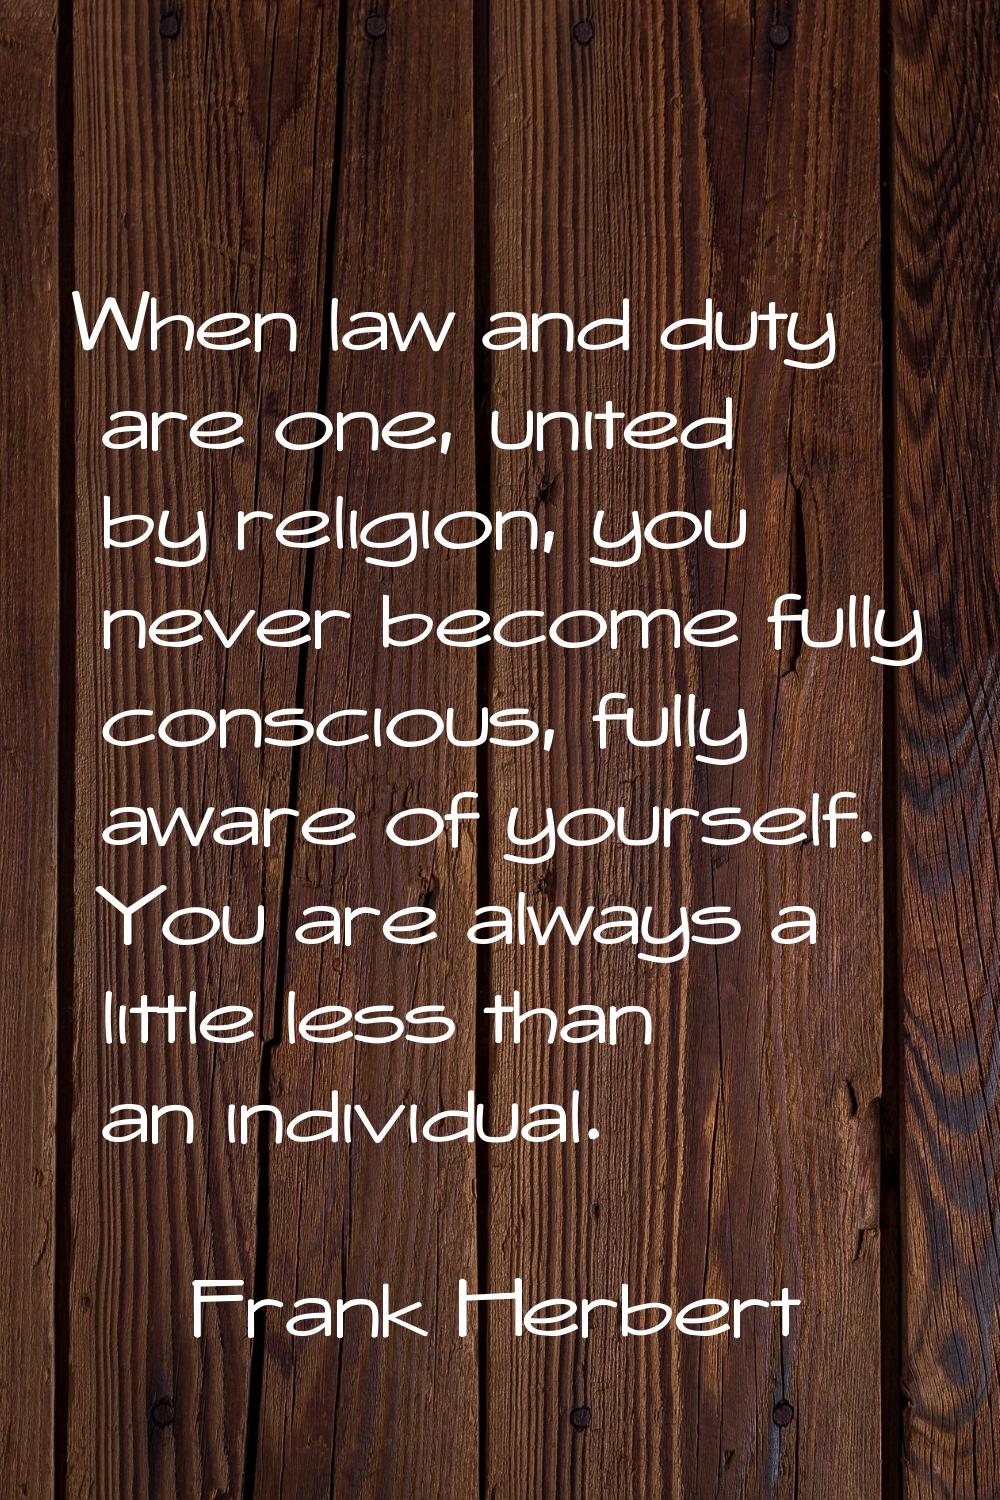 When law and duty are one, united by religion, you never become fully conscious, fully aware of you